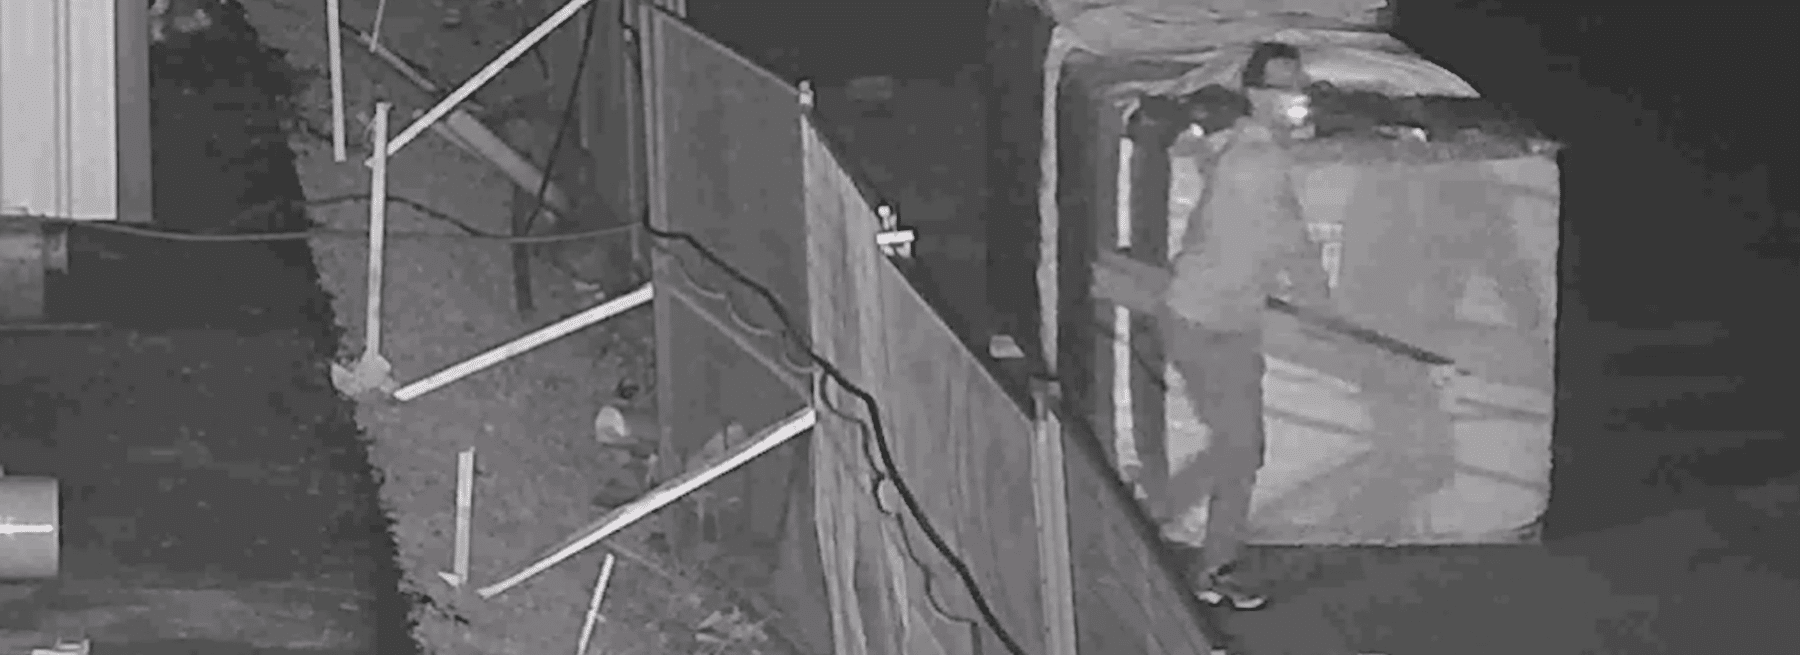 Lumber Thief at Construction Site Caught on Camera